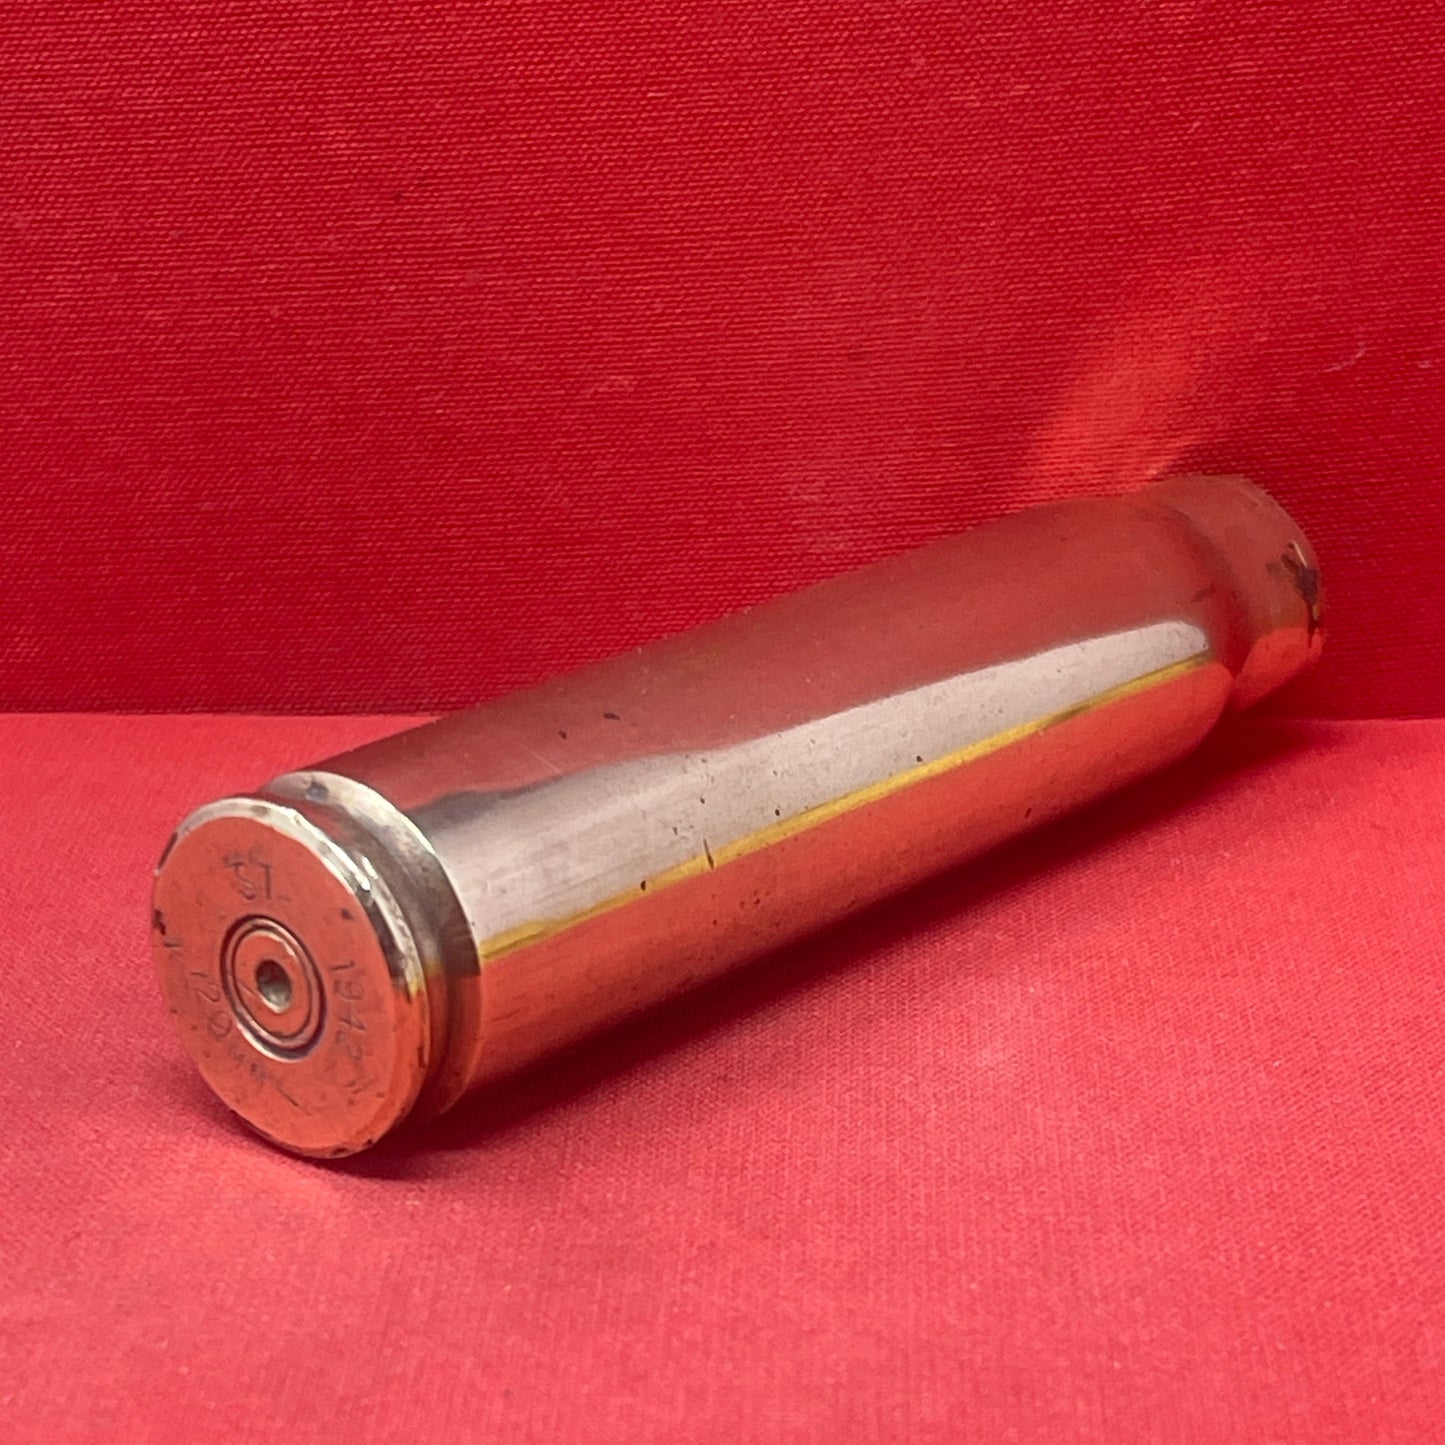 This particular 20mm casing was manufactured in&nbsp; ST - Royal Ordnance Factory, Steeton